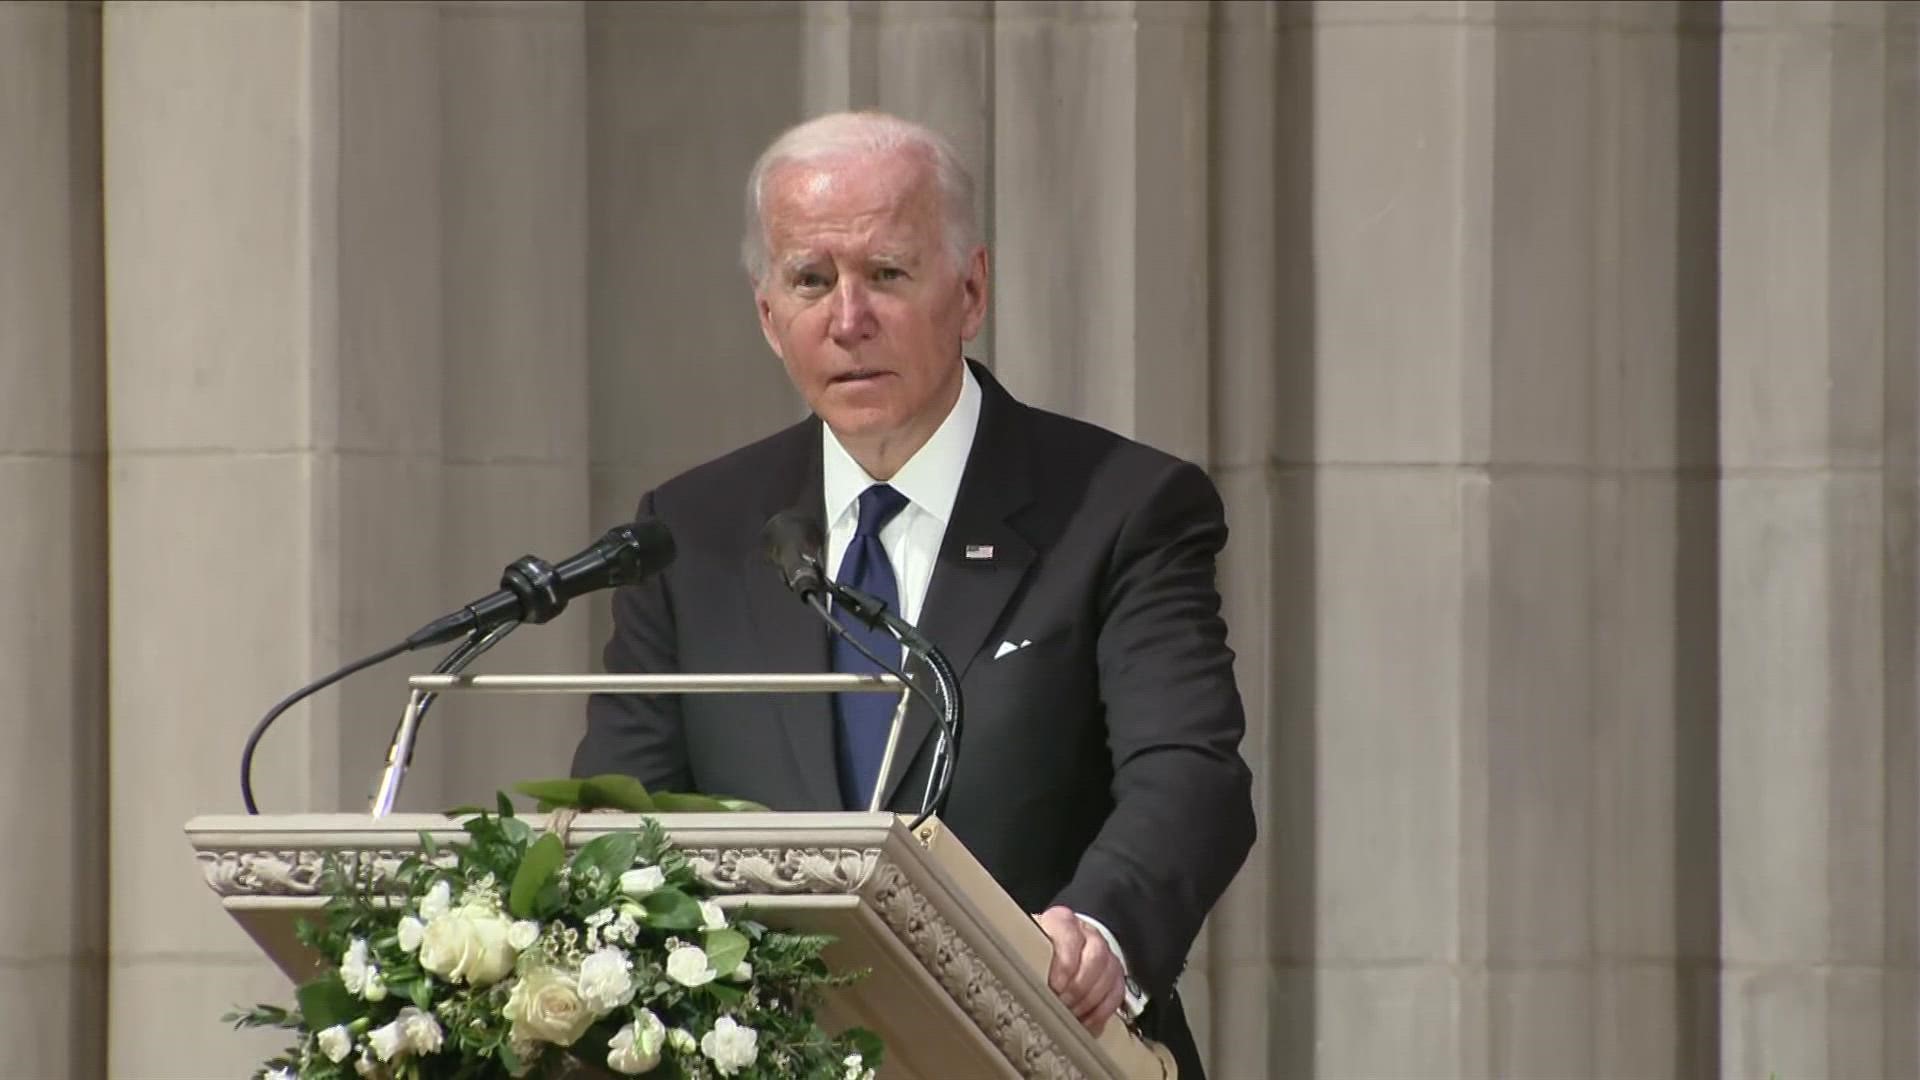 "Her name is still synonymous for America, a force for good in this world," President Joe Biden said of Madeleine Albright, the first female secretary of state.